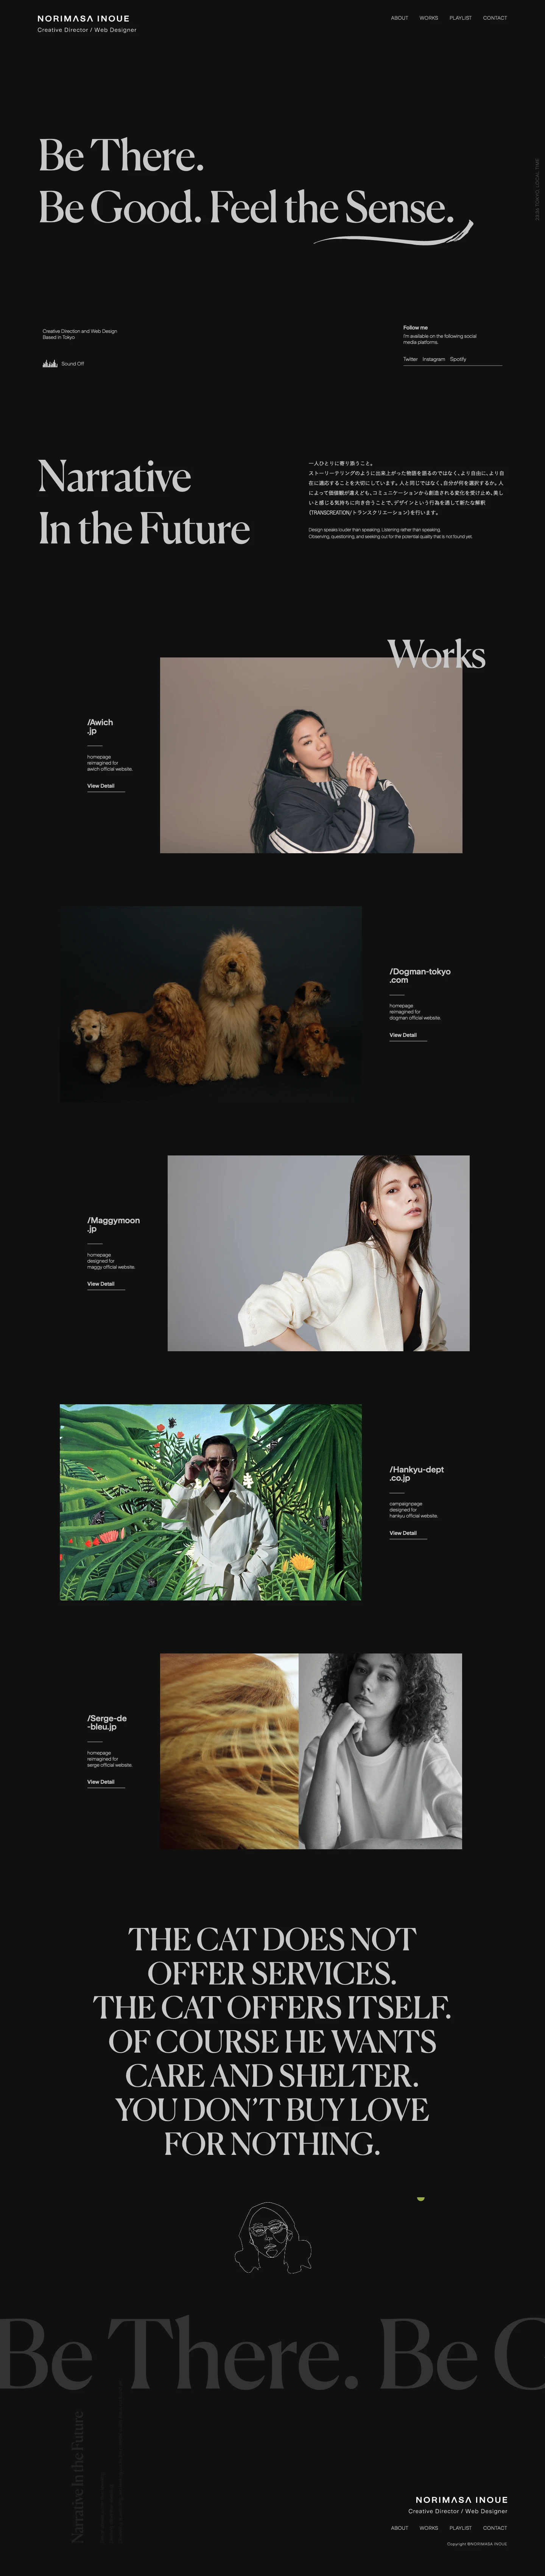 Norimasa Inoue Landing Page Example: Creative Direction and Web Design Based in Tokyo.